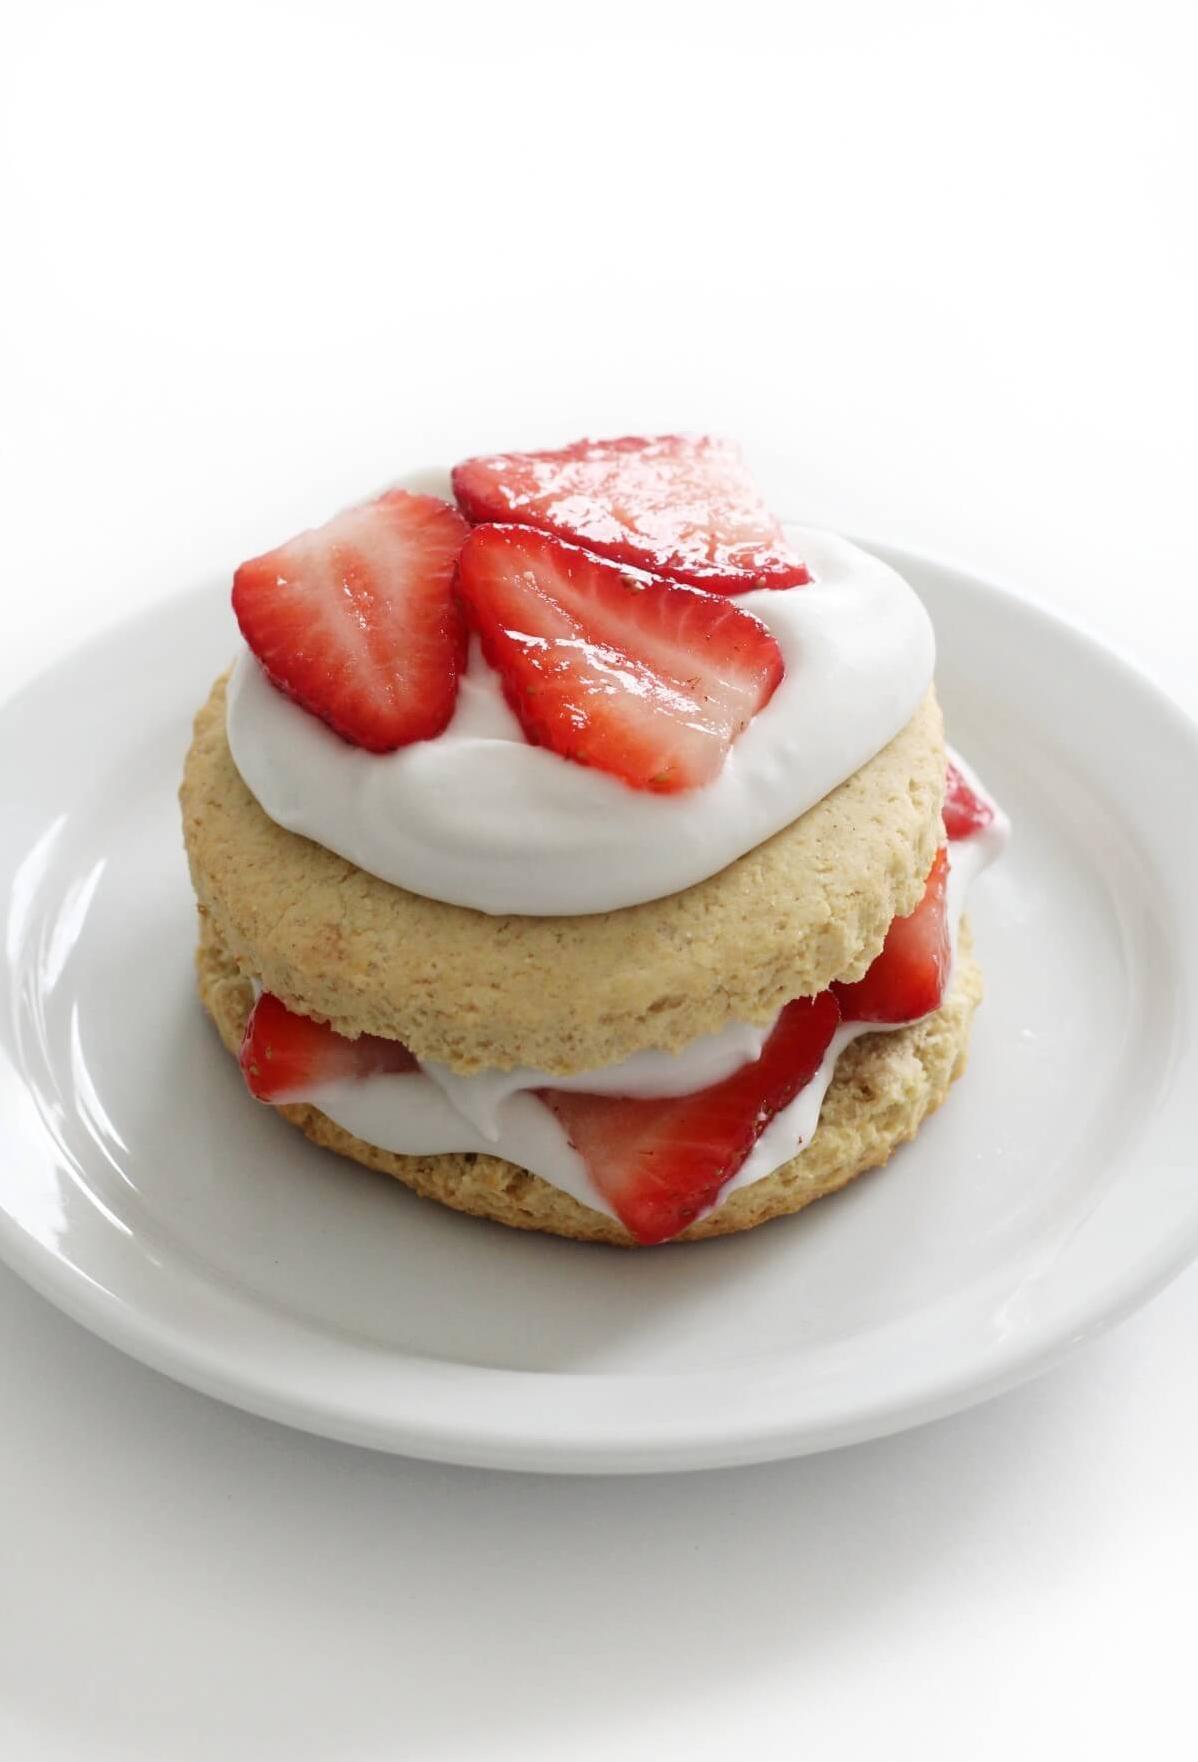  Your taste buds will dance at the first bite of this heavenly, organic shortcake